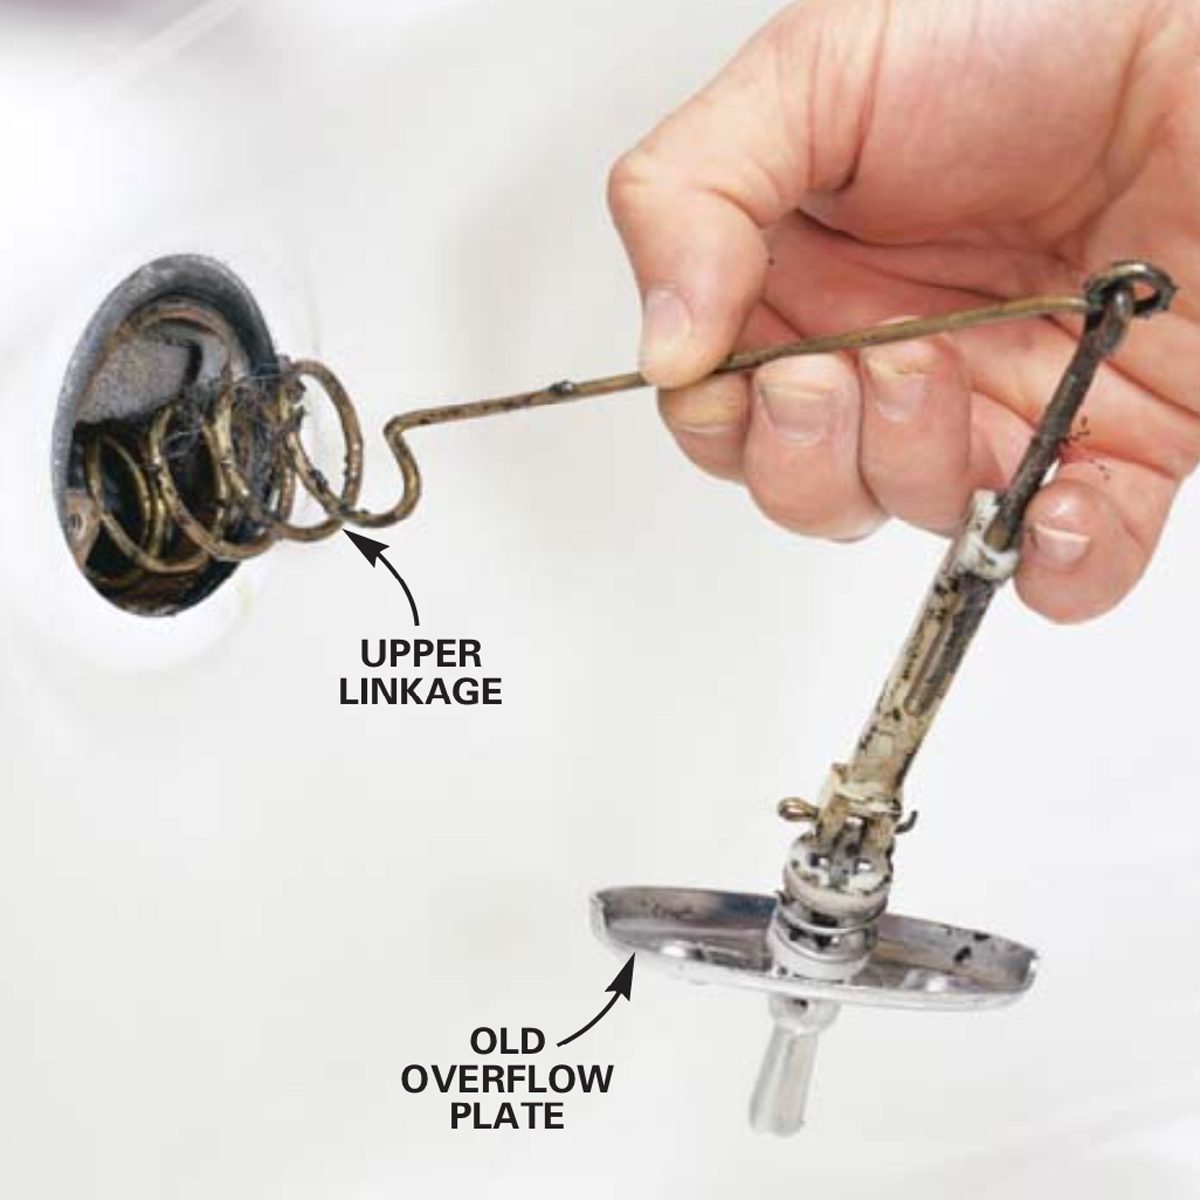 How to Convert Bathtub Drain Lever to a Lift and Turn Drain